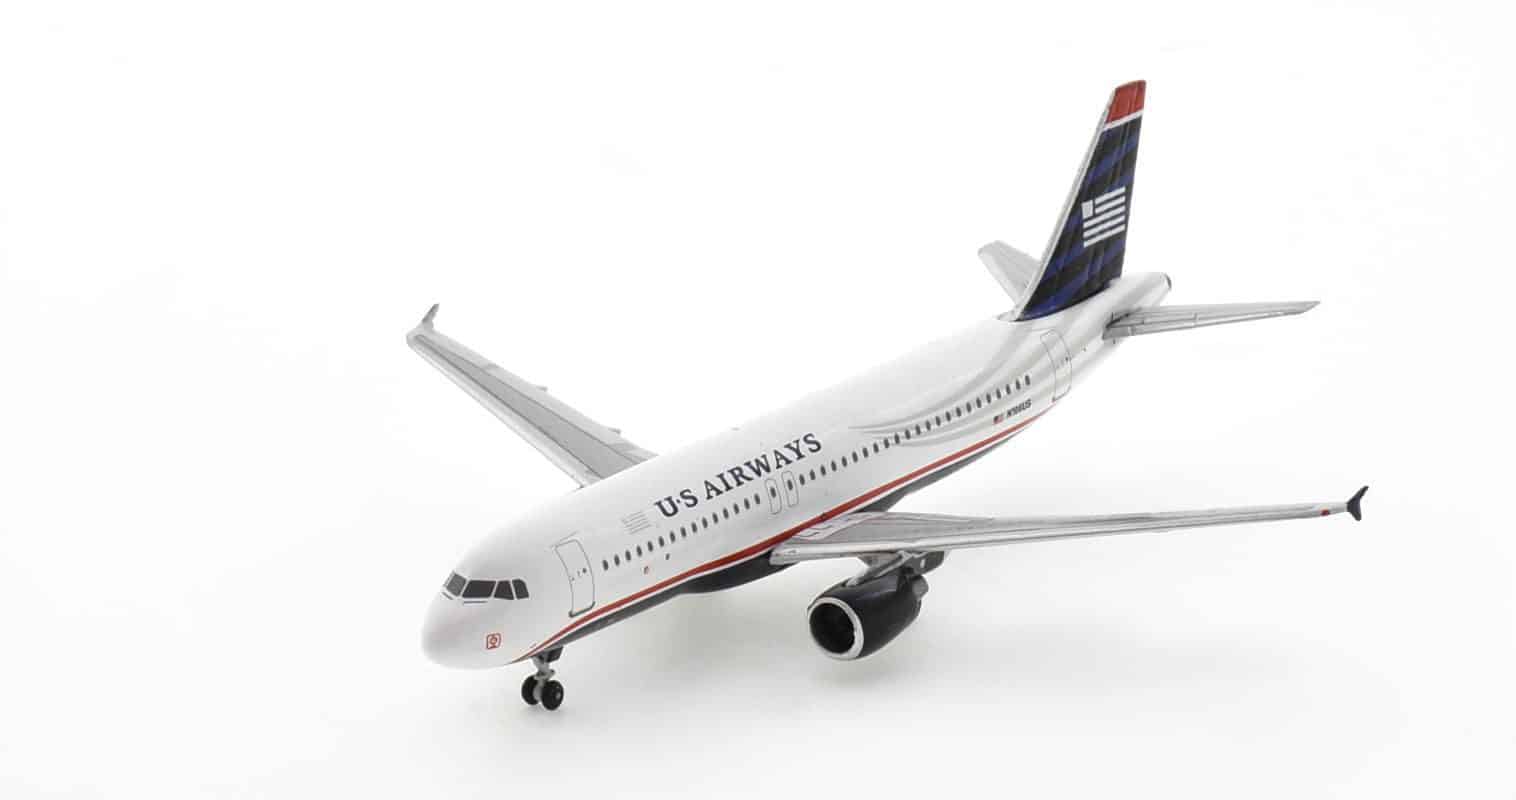 Front port side view of AC419976 - 1/400 scale diecast model of US Airway's A320-200 registration N106US that landed in the Hudson River on January 15, 2009.